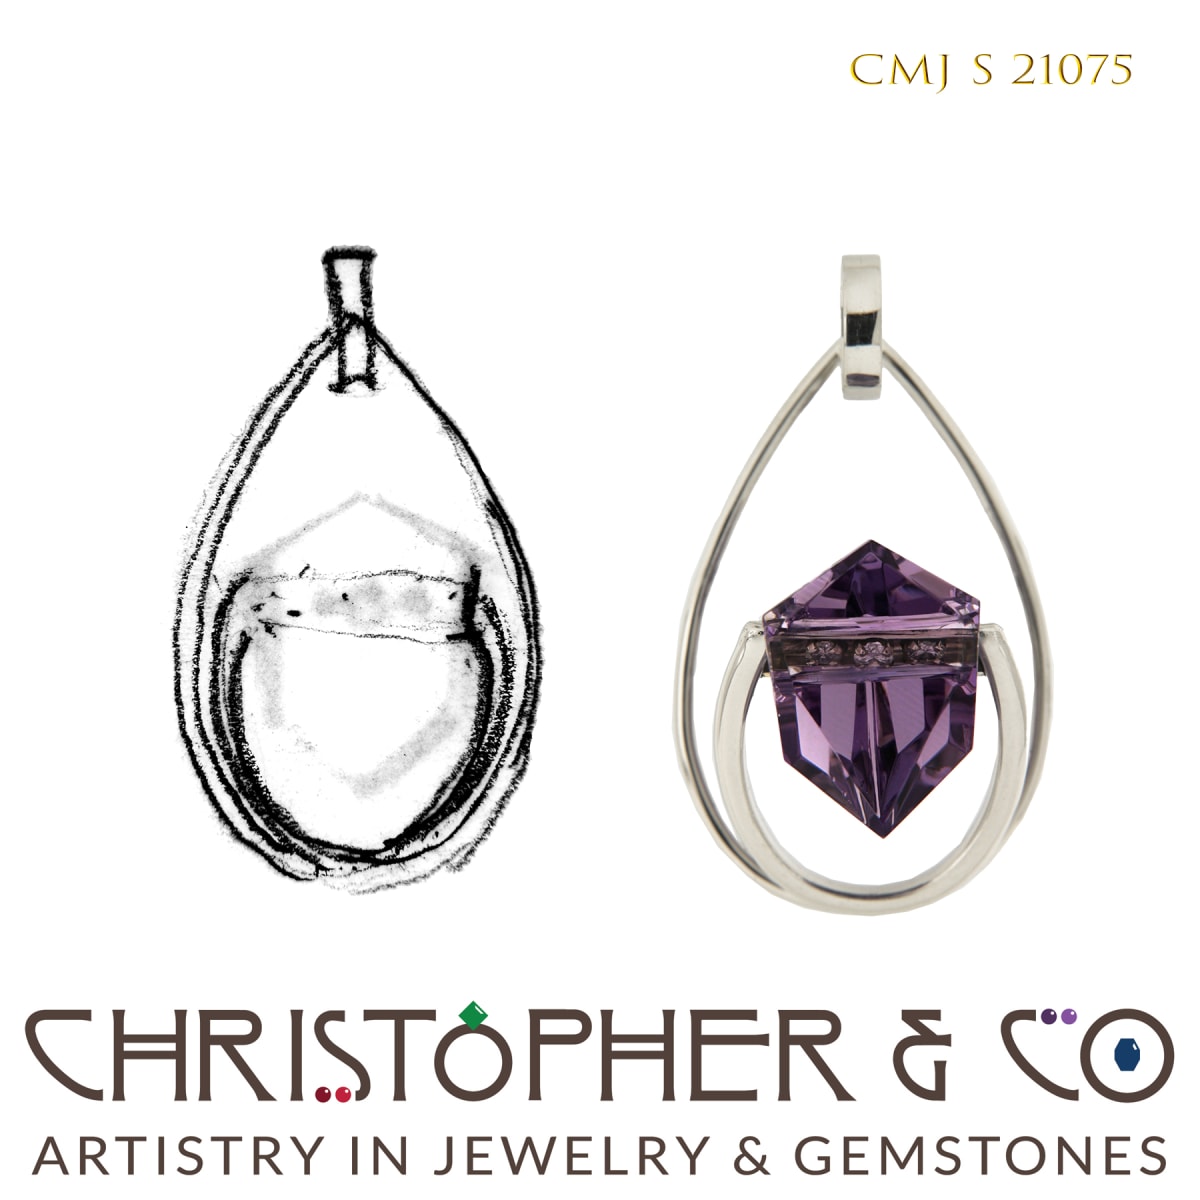 CMJ S 21075 White Gold Pendant by Christopher M. Jupp set with Amethyst Bead hand-cut by Sean Davis  Image: CMJ S 21075 White Gold Pendant by Christopher M. Jupp set with Amethyst Bead hand-cut by Sean Davis